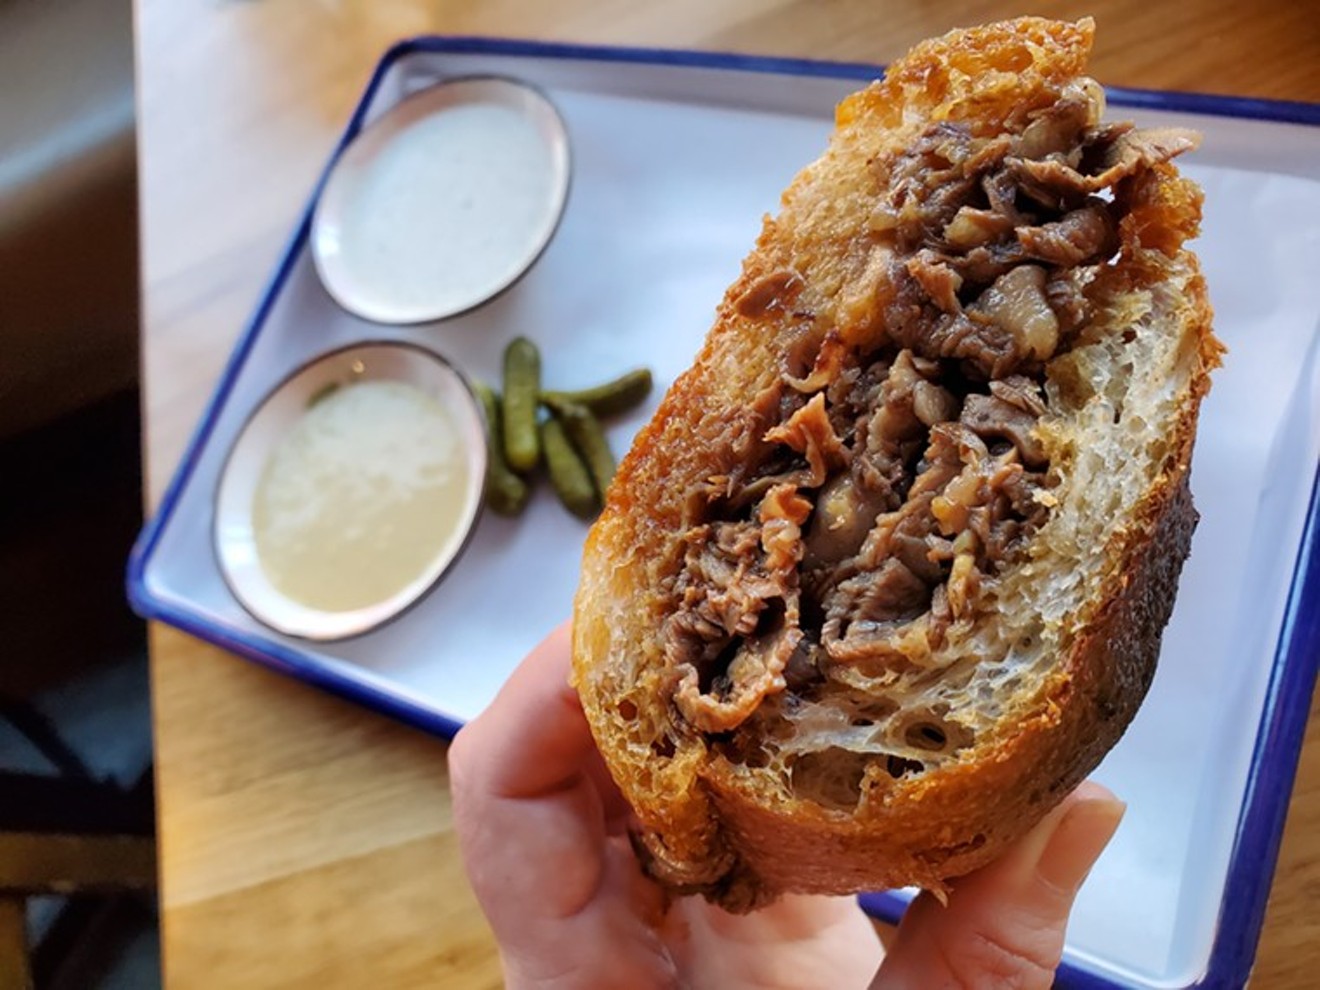 A5 has outstanding steaks, but the French dip is a must-try, too.